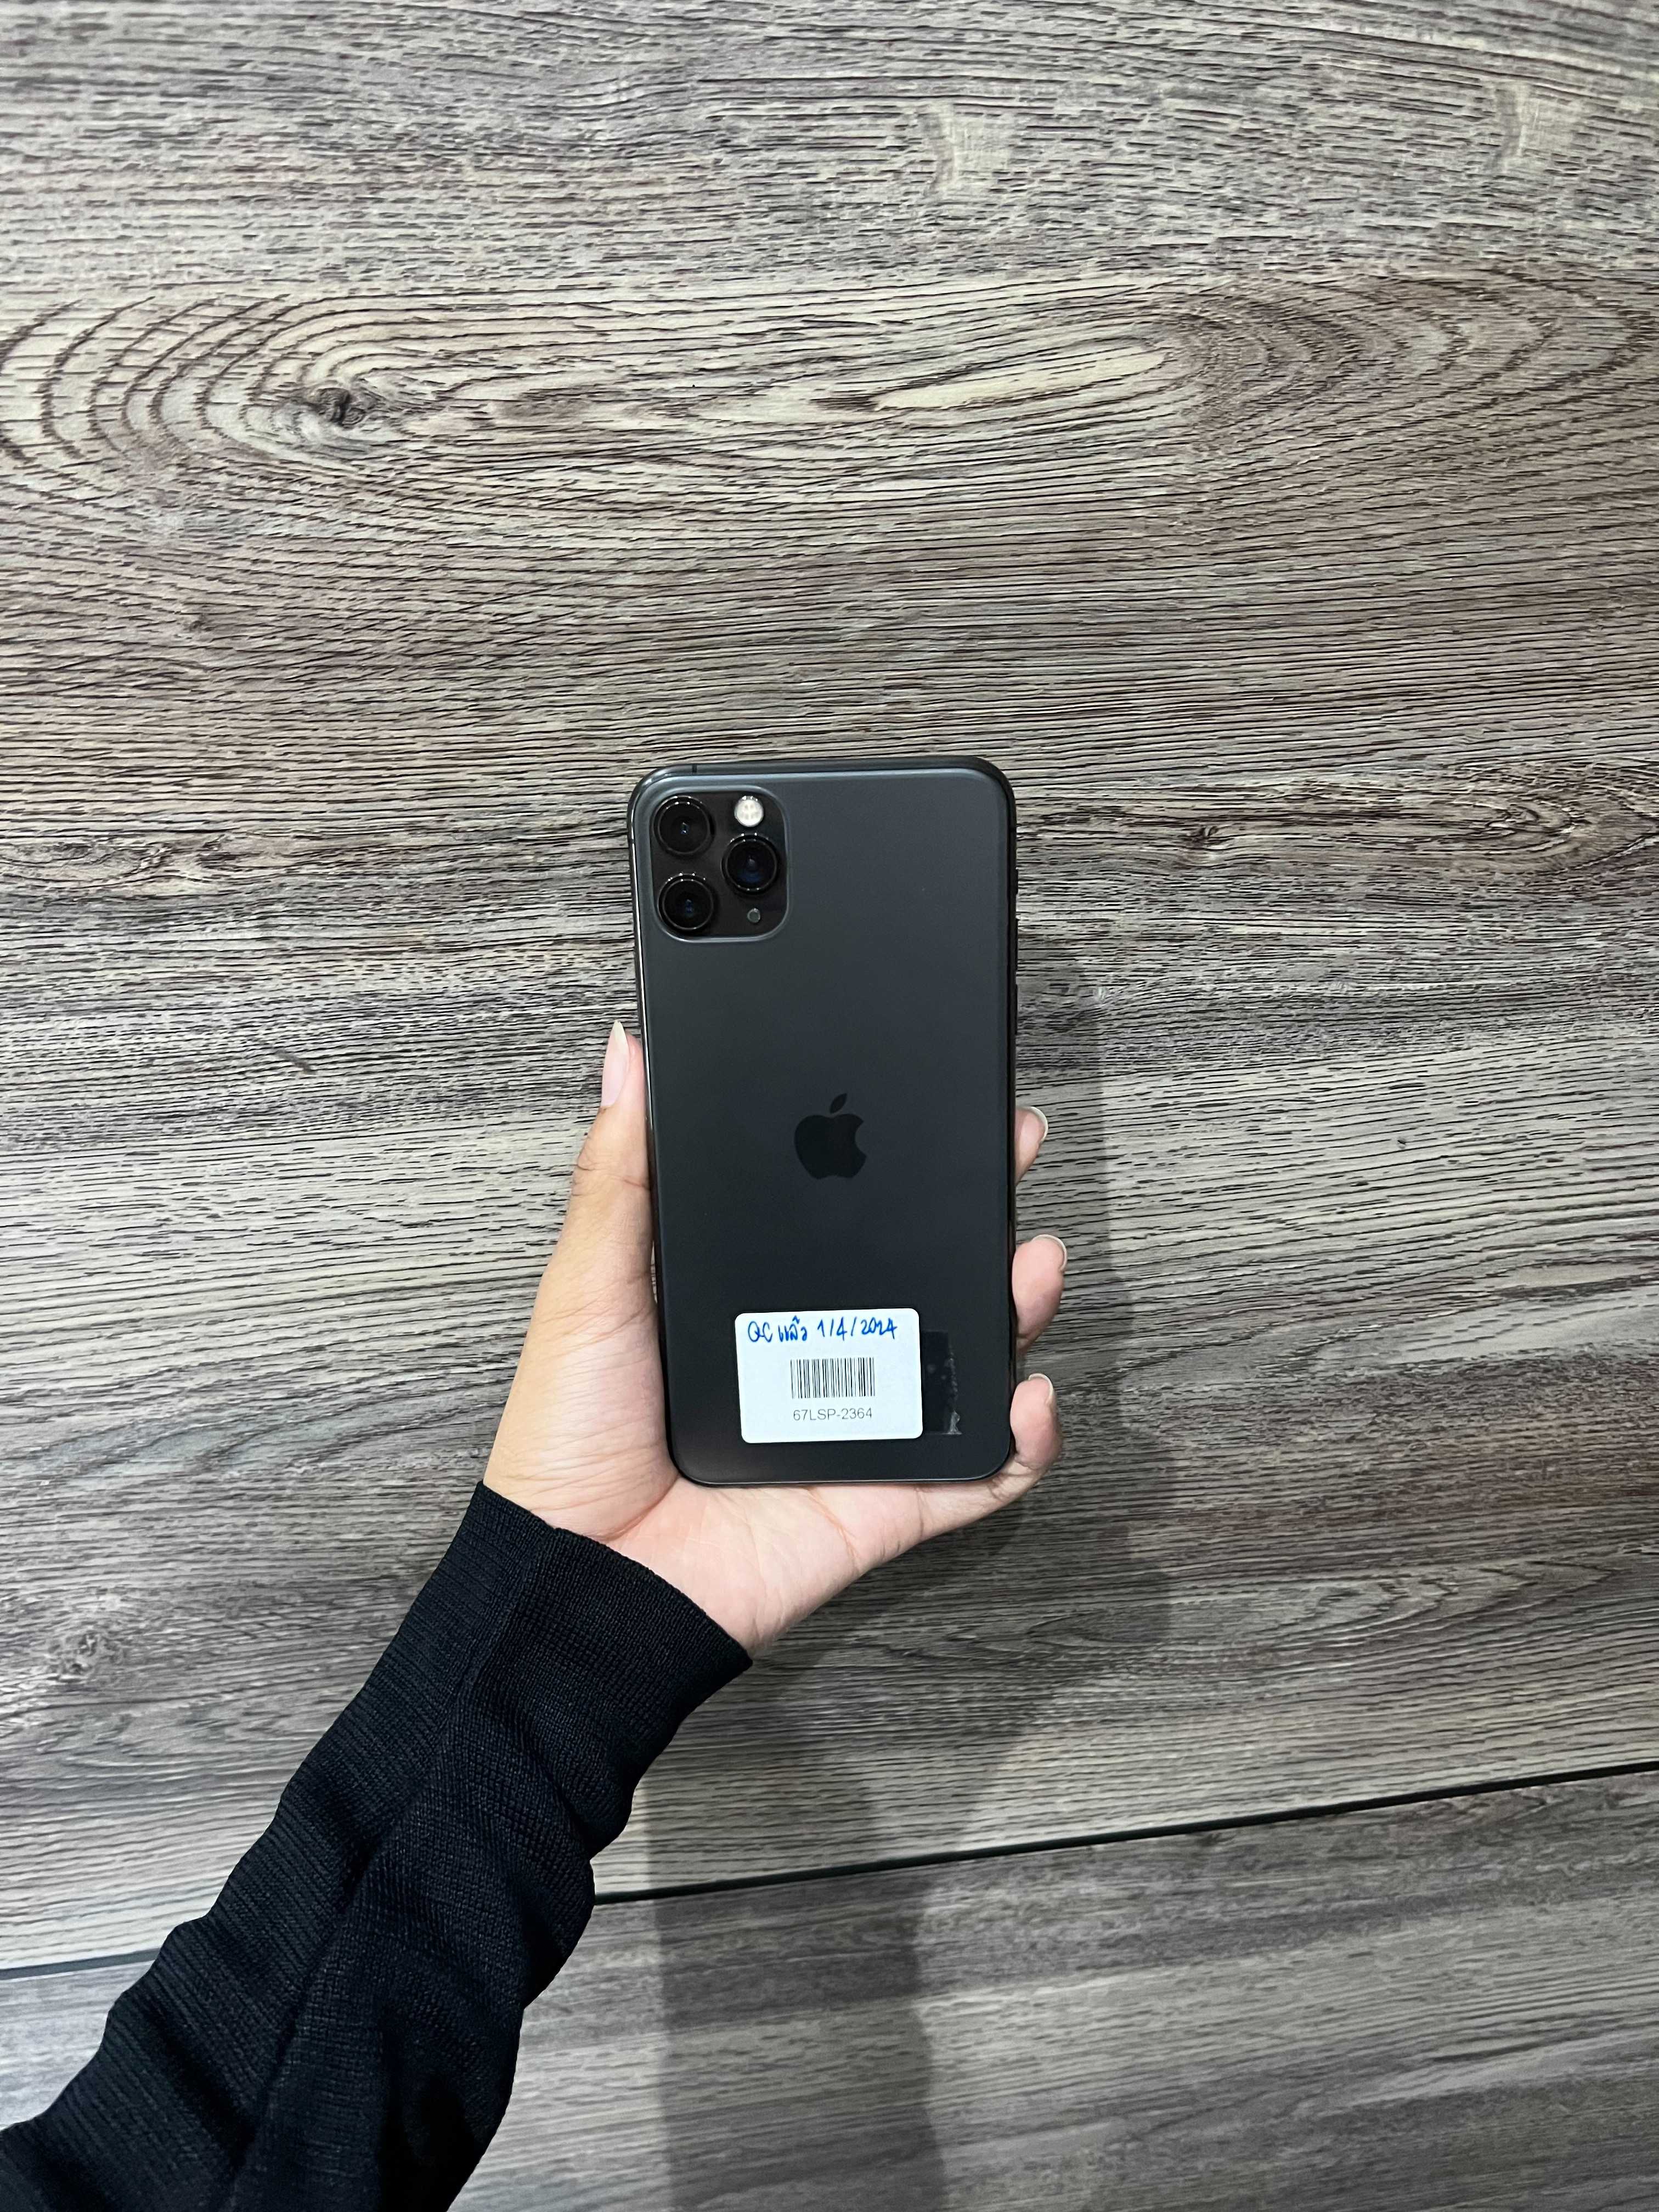 Used iPhone 11 Promax 64gb Space Gray 67LSP-2364